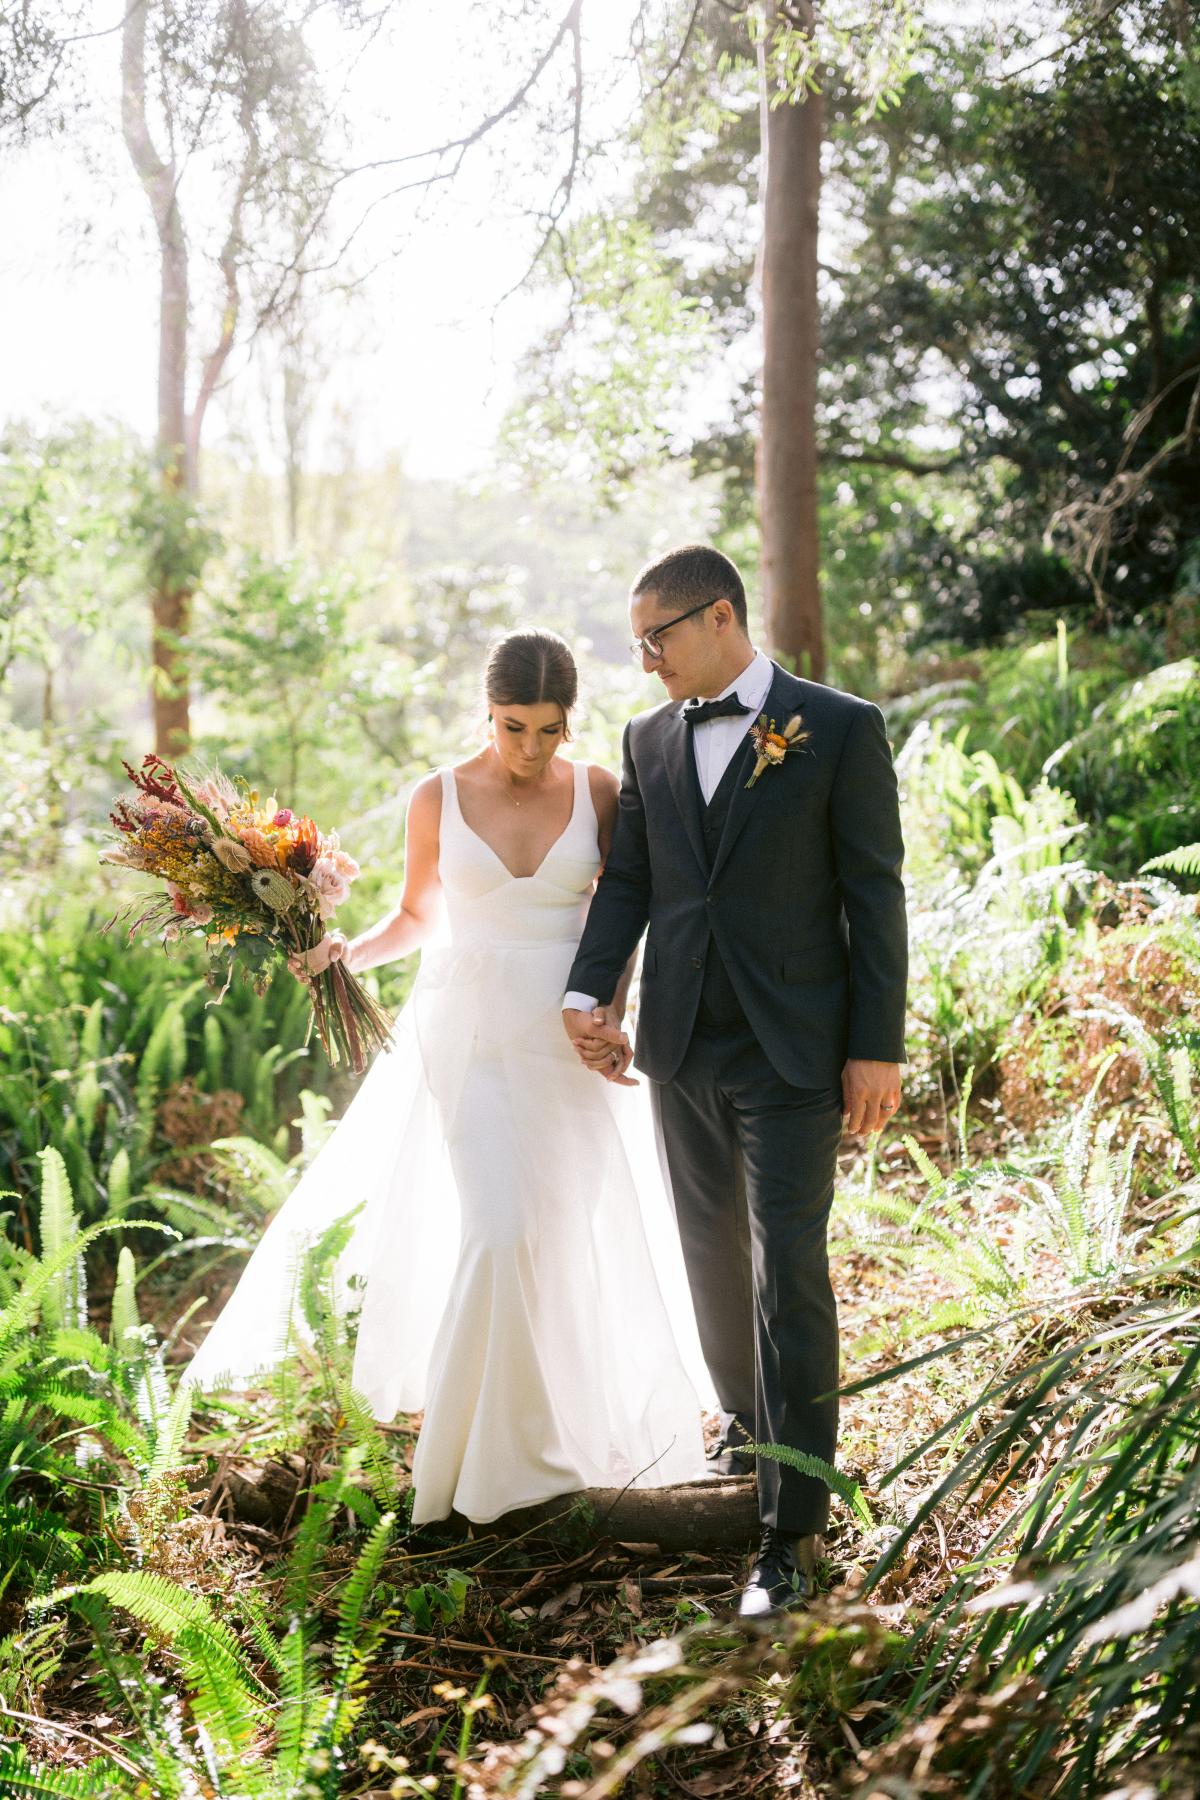 KWH real bride Annalese wears her Aisha gown with see through aline skirt in the woods with her new husband.